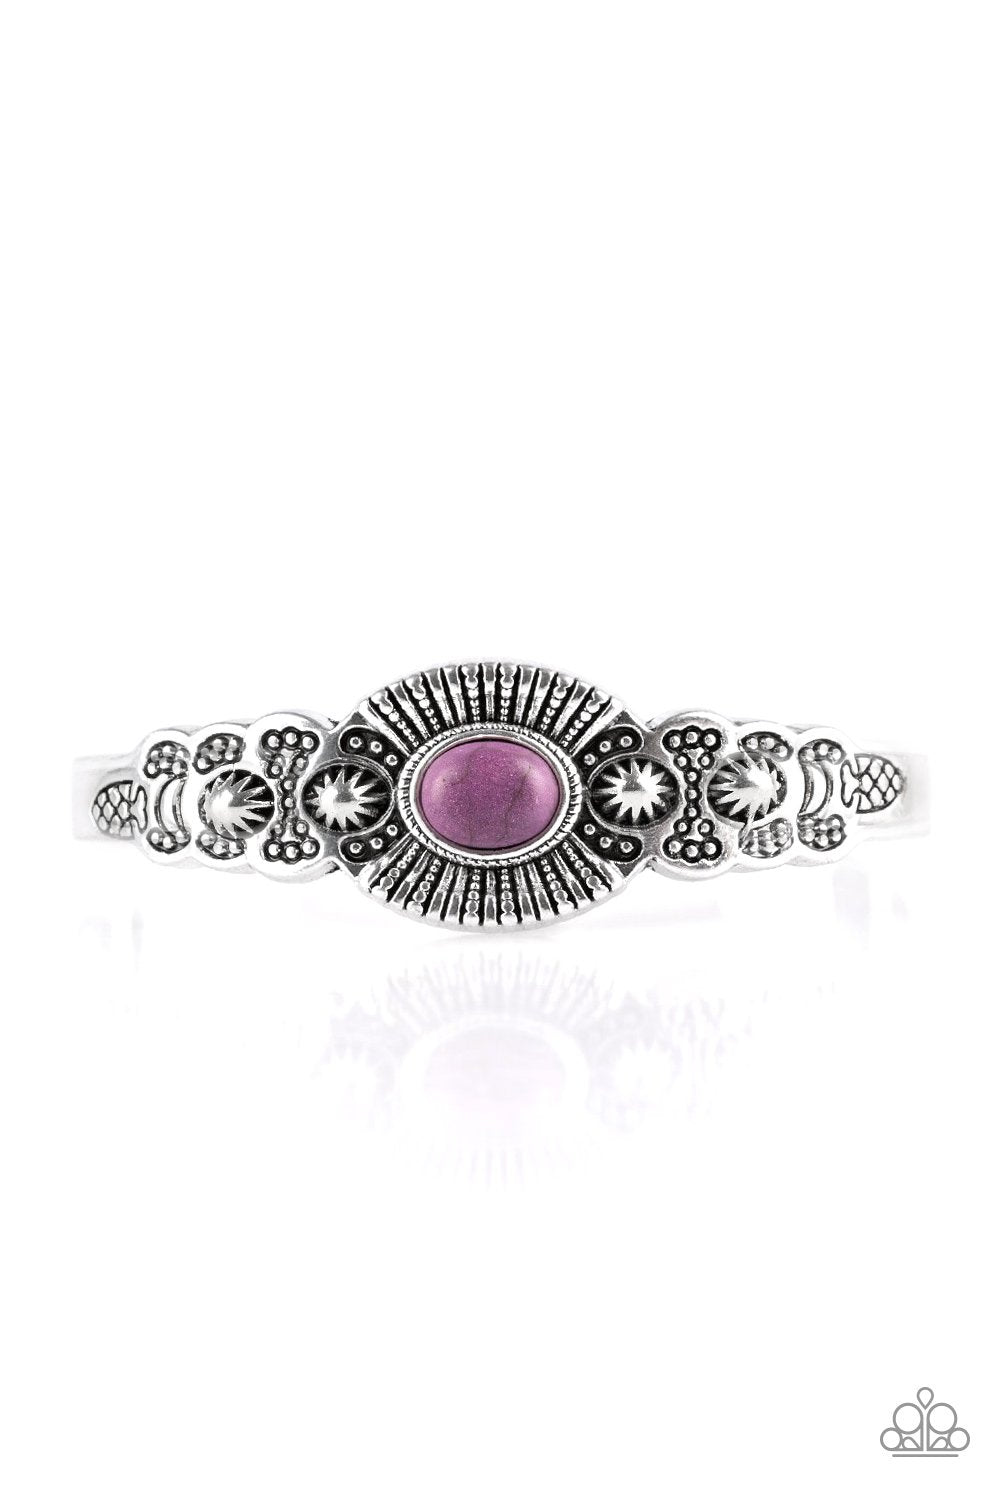 Wide Open Mesas Purple Stone and Silver Cuff Bracelet - Paparazzi Accessories-CarasShop.com - $5 Jewelry by Cara Jewels